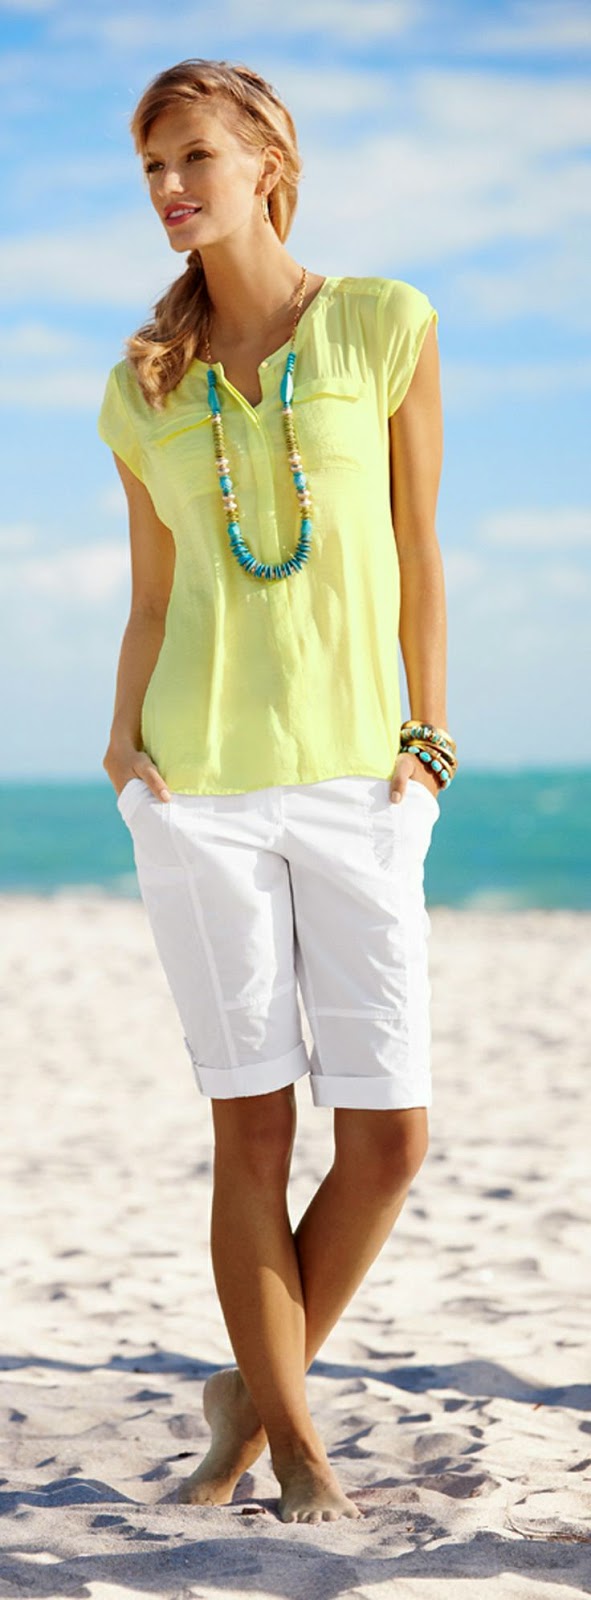 NewTrends Outfit Inspiration Summer  Fashion